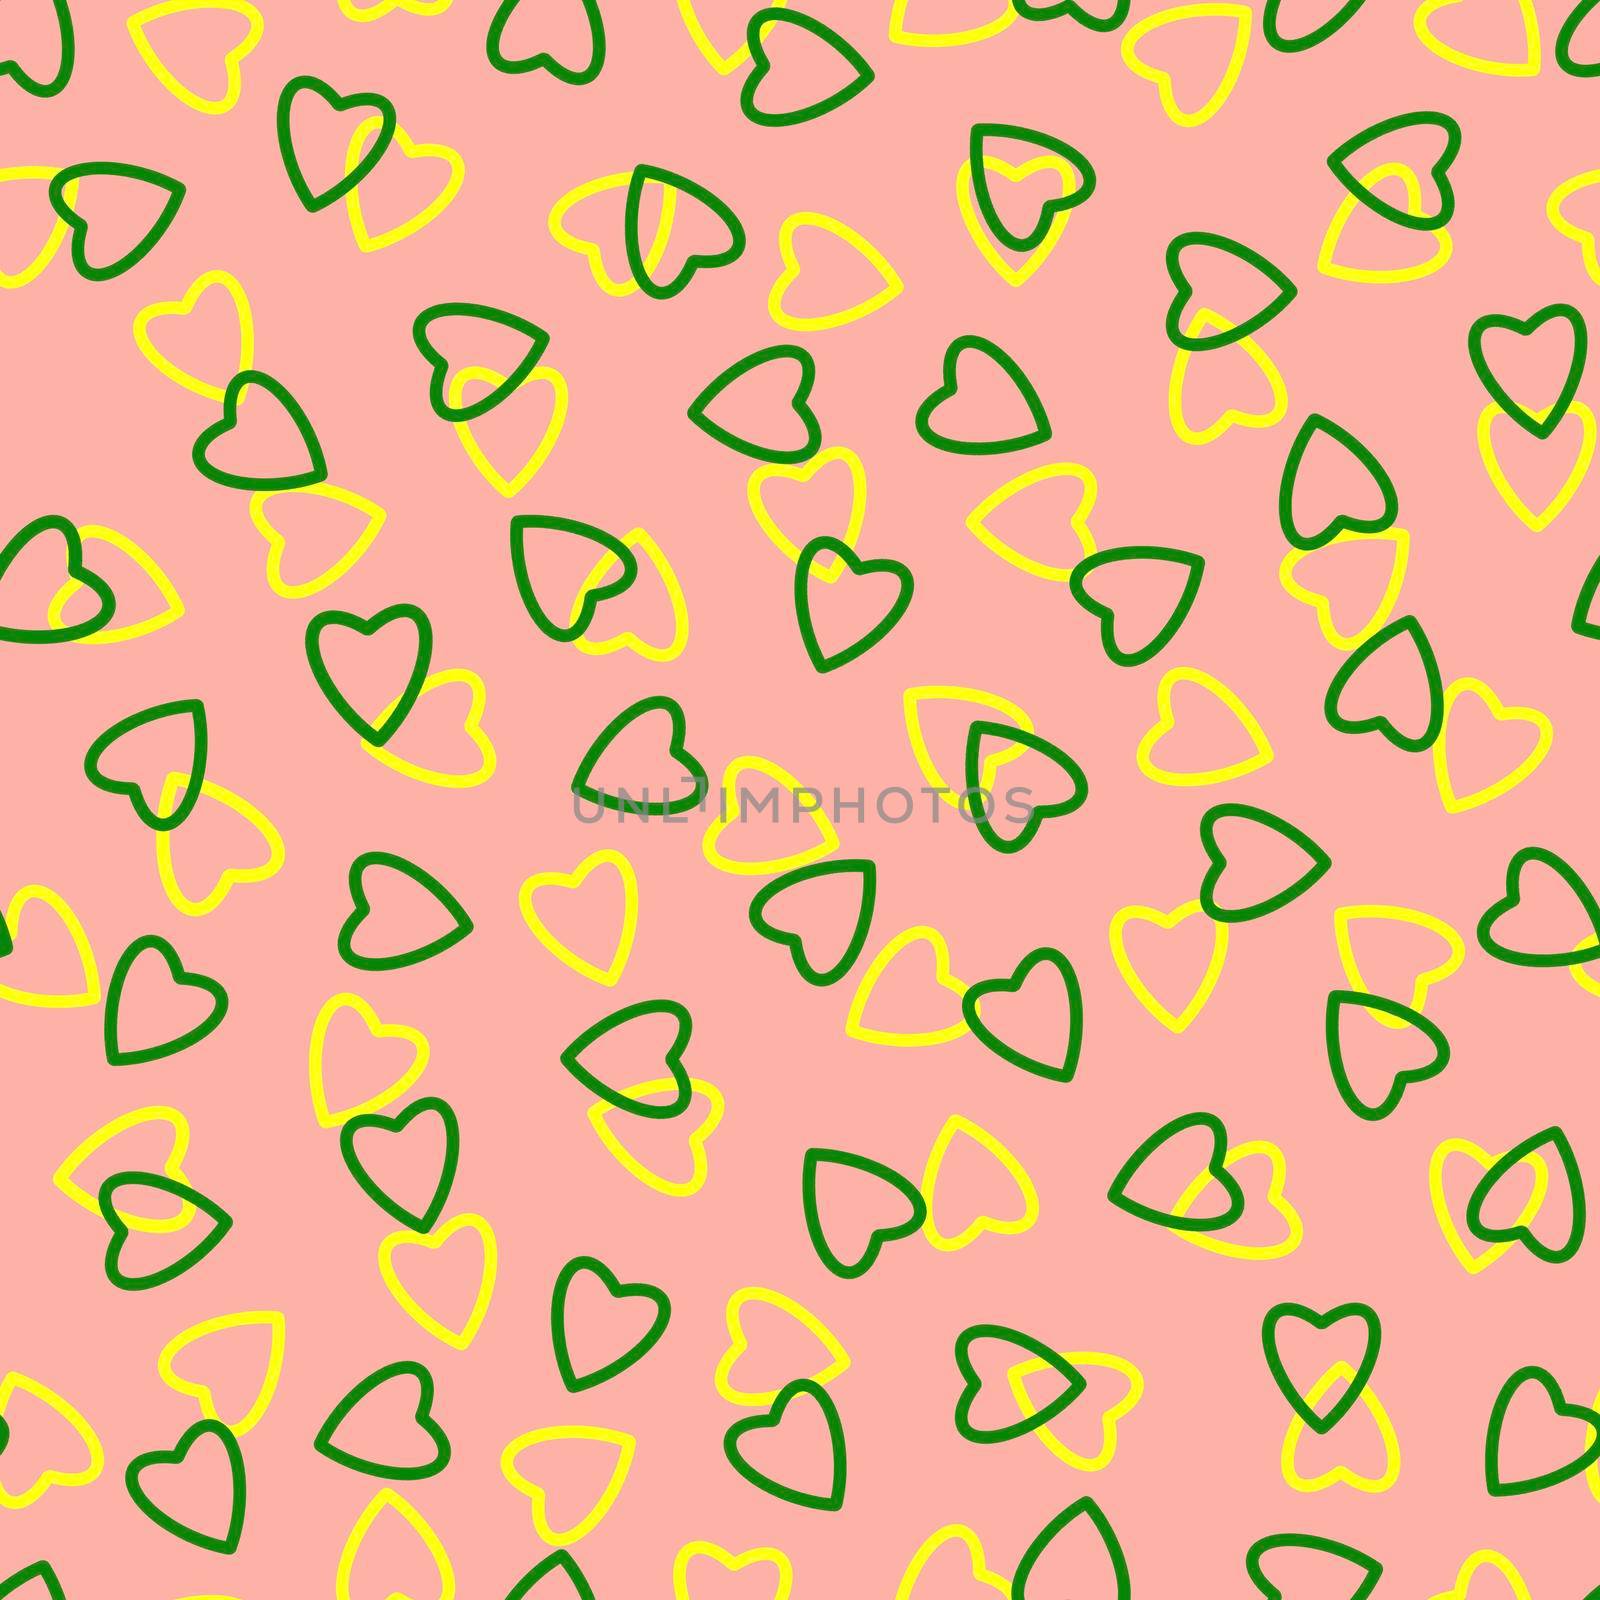 Simple hearts seamless pattern,endless chaotic texture made tiny heart silhouettes.Valentines,mothers day background.Great for Easter,wedding,scrapbook,gift wrapping paper,textiles.Green,yellow,peach.